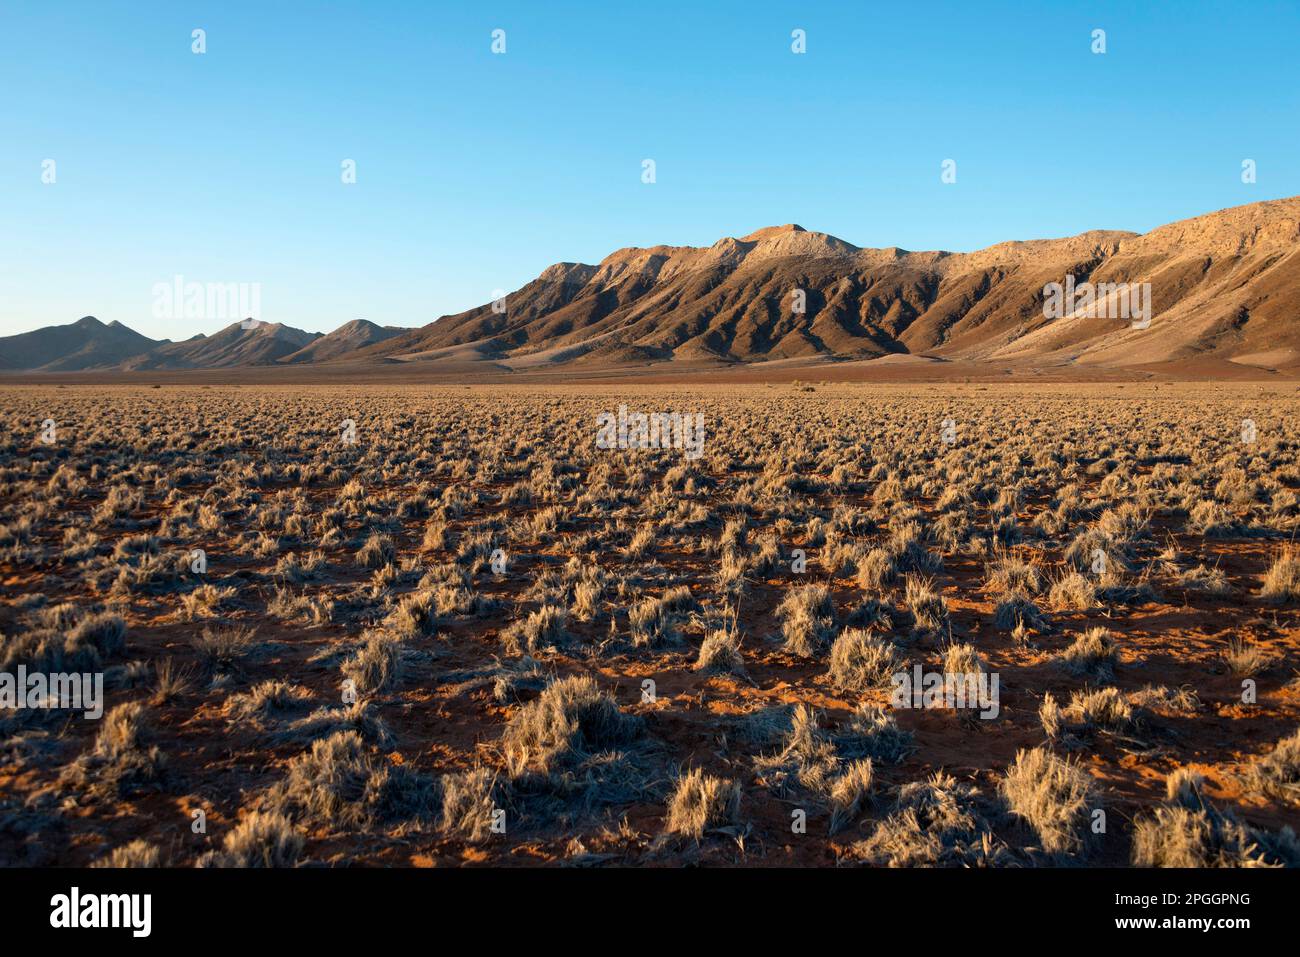 Mountains, landscape, C14, north of Solitaire, Namibia Stock Photo